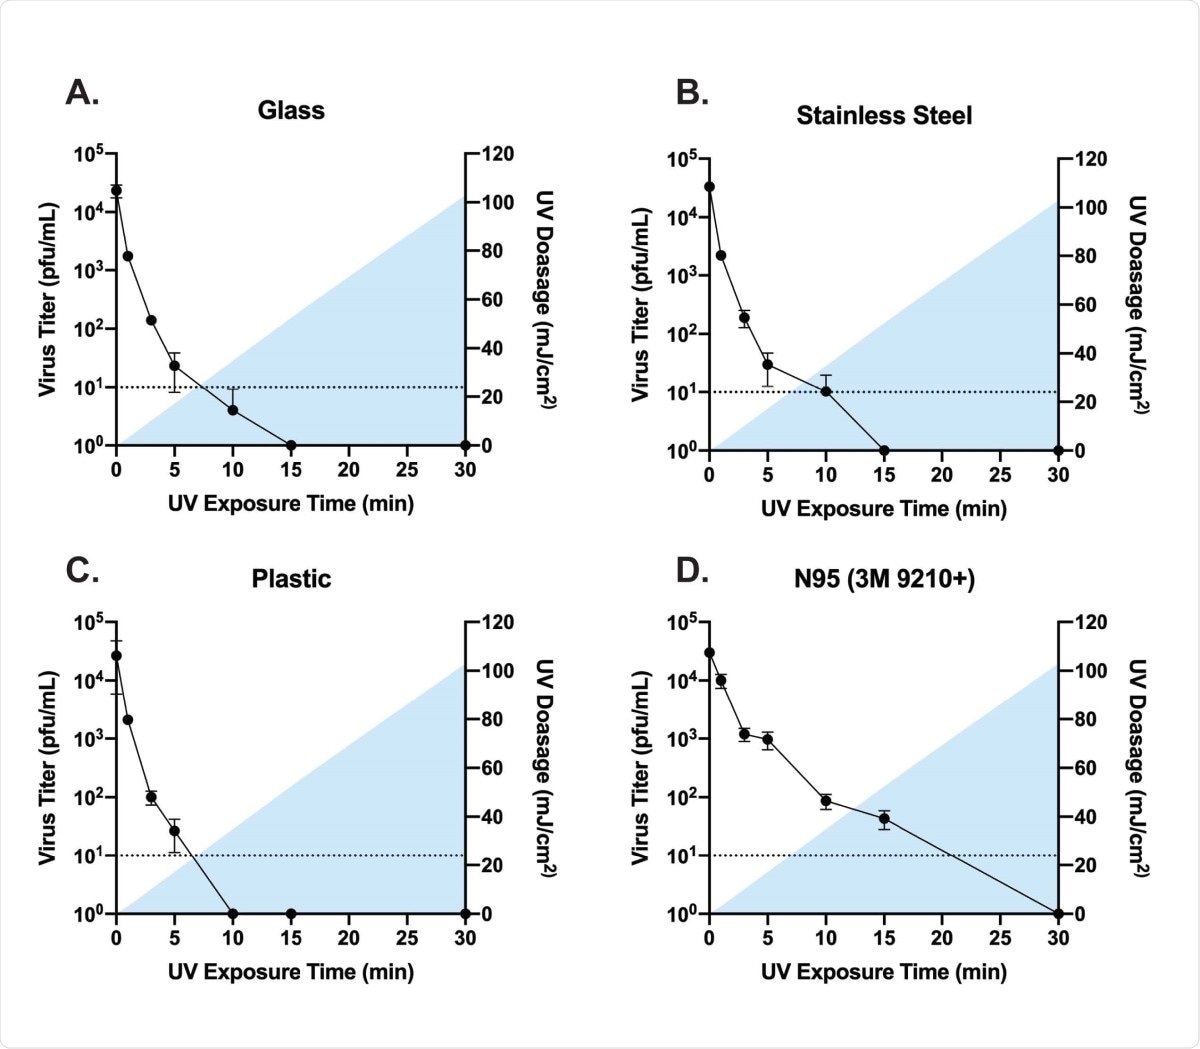 Titers of infectious SARS-CoV-2 recovered from UV exposed glass, stainless steel, plastic, and N95 material (A-D). Time 0 represents controls that were not exposed to UV. All timepoints are representative of the mean and standard error of 3 replicates. Blue shading represents the area under the curve for the UV dosage acquired over time. Samples with data points below the limit of detection resulted from a subset of datapoints having undetectable levels of virus. Undetected samples were assigned a value of 1 for graphing purposes.